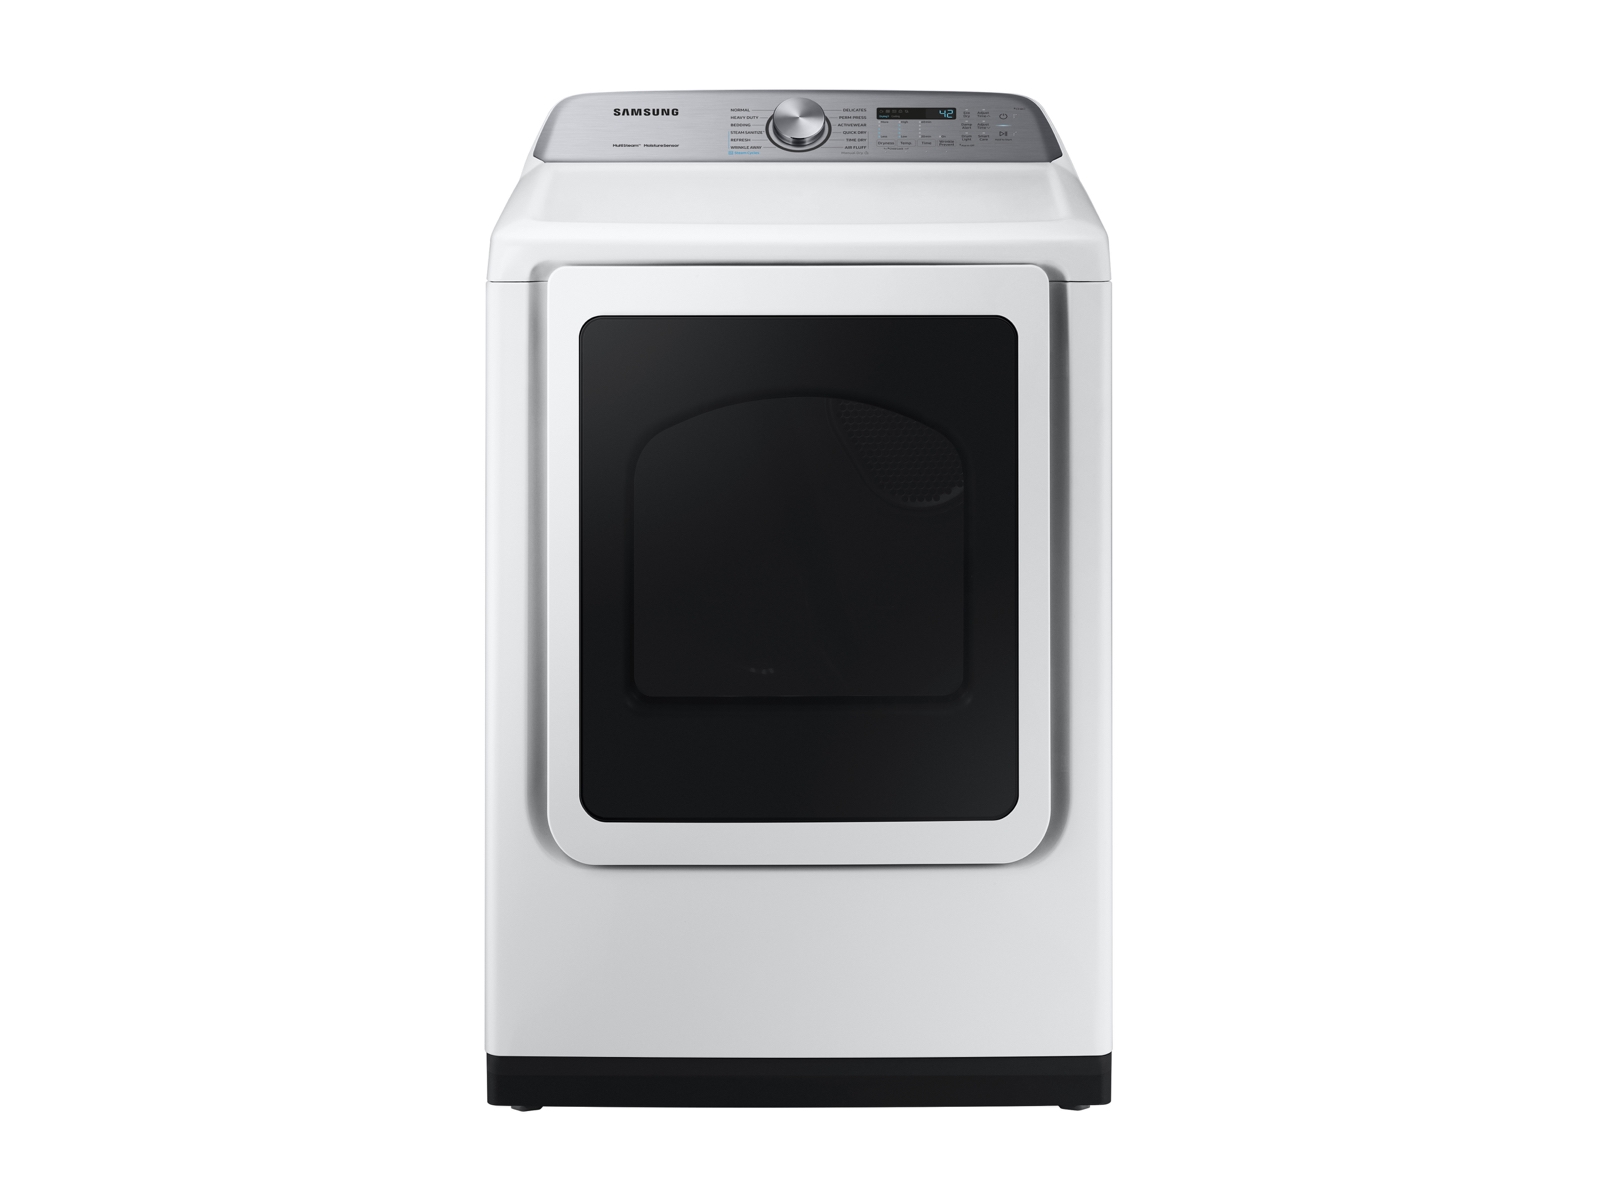 Photos - Tumble Dryer Samsung 7.4 cu. ft. Gas Dryer with Steam Sanitize+ in White(DVG50R5400W/A3 